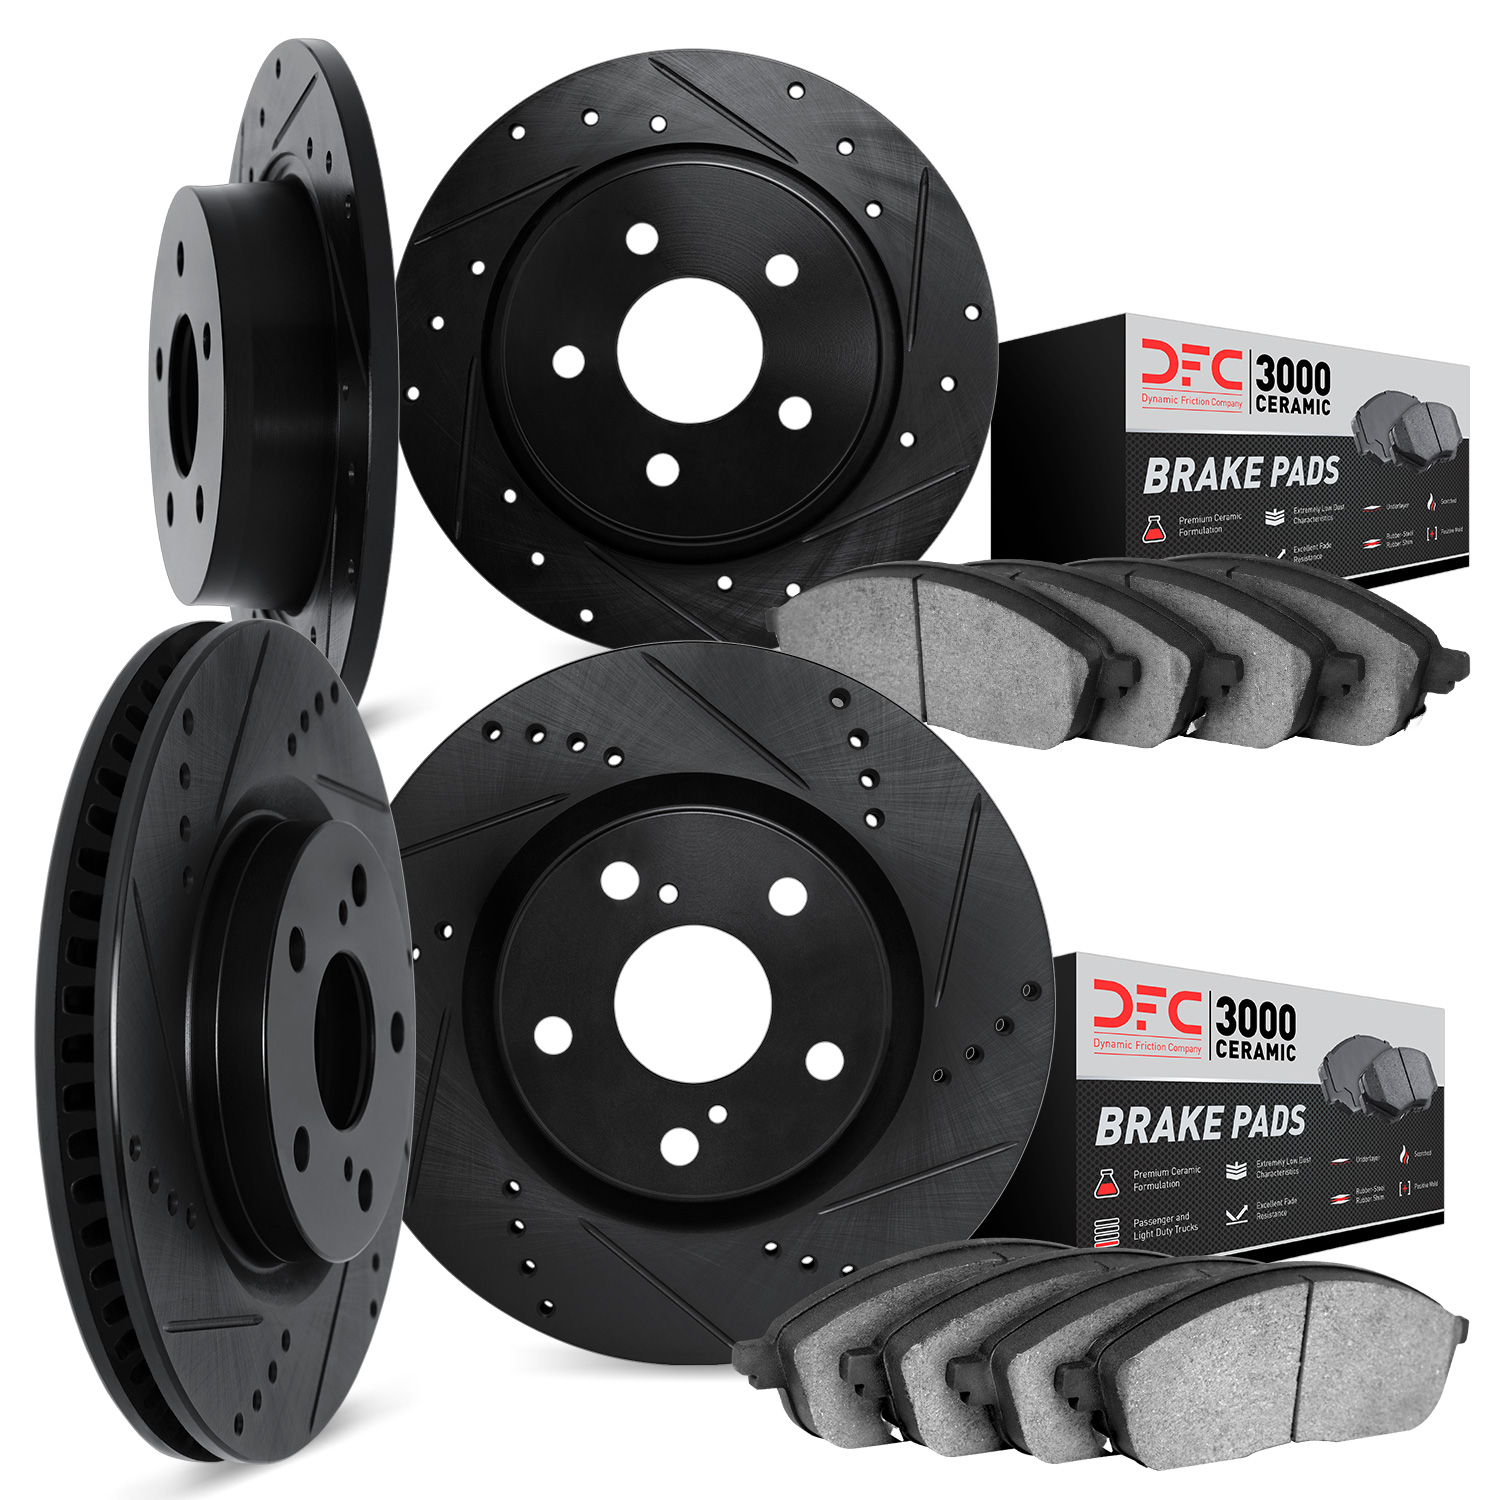 8304-40013 Drilled/Slotted Brake Rotors with 3000-Series Ceramic Brake Pads Kit [Black], 1995-1999 Mopar, Position: Front and Re